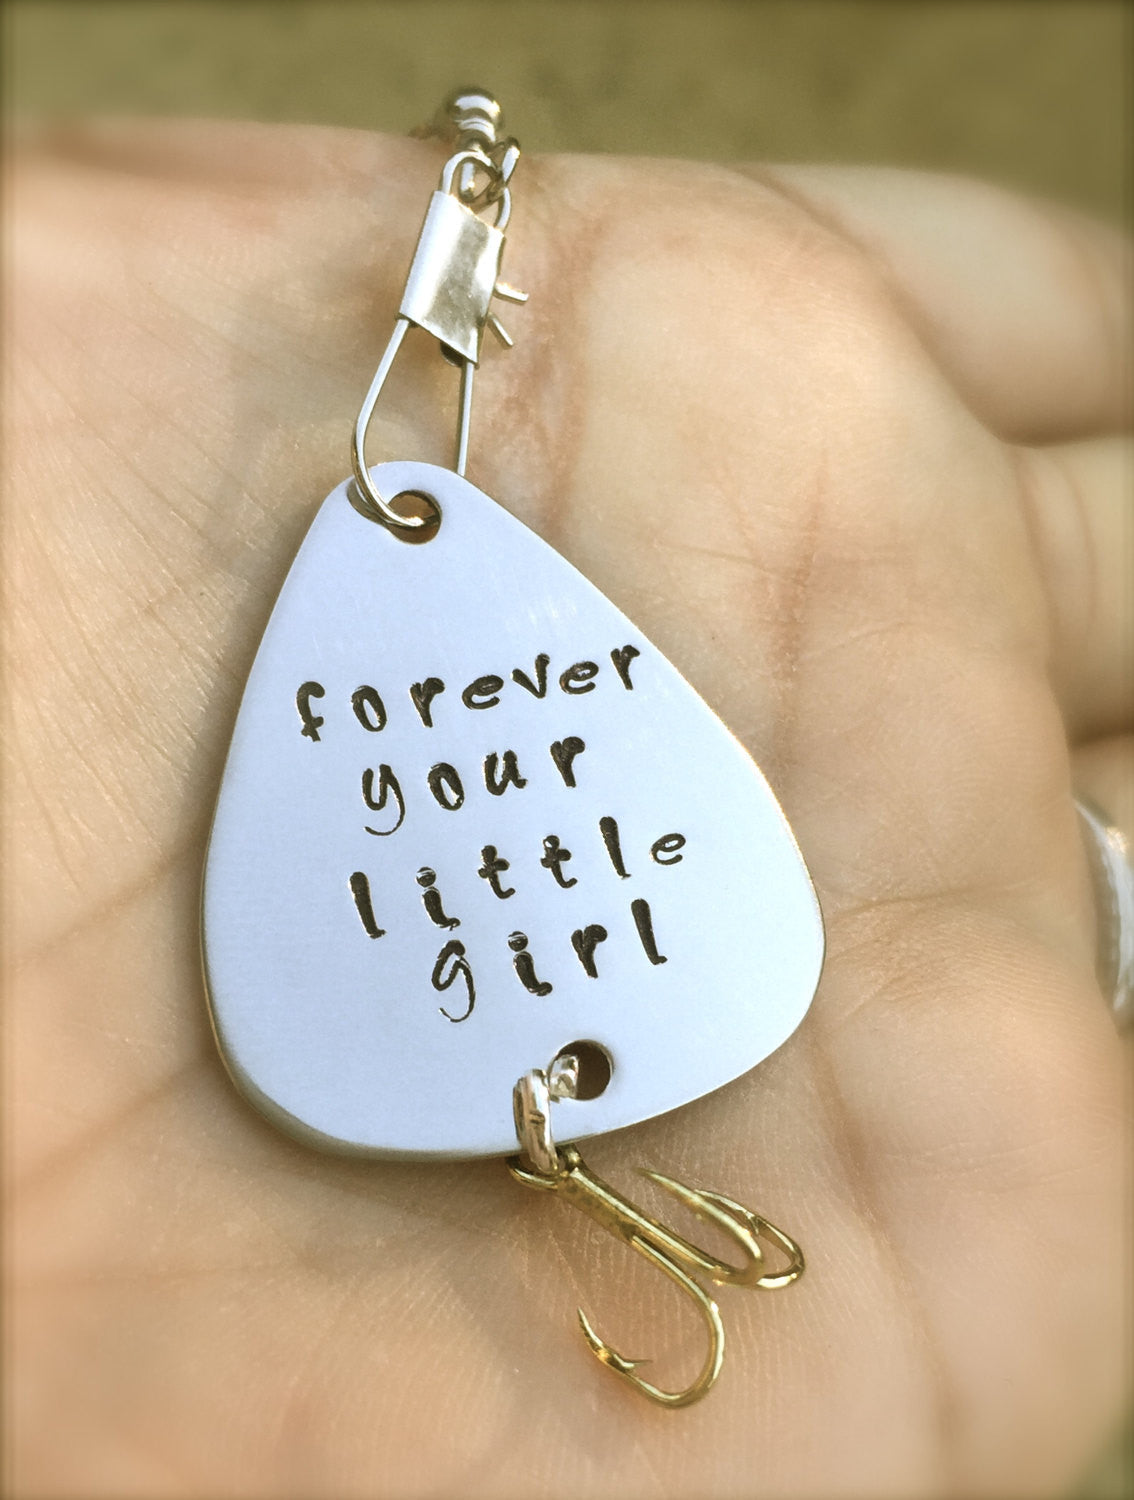 Fishing Lures, Your'e My Person, Father Of the Bride Fishing Lure, Forever Your Little Girl, My Reel True Love, Father's Day Gift, Gifts Men - Natashaaloha, jewelry, bracelets, necklace, keychains, fishing lures, gifts for men, charms, personalized, 